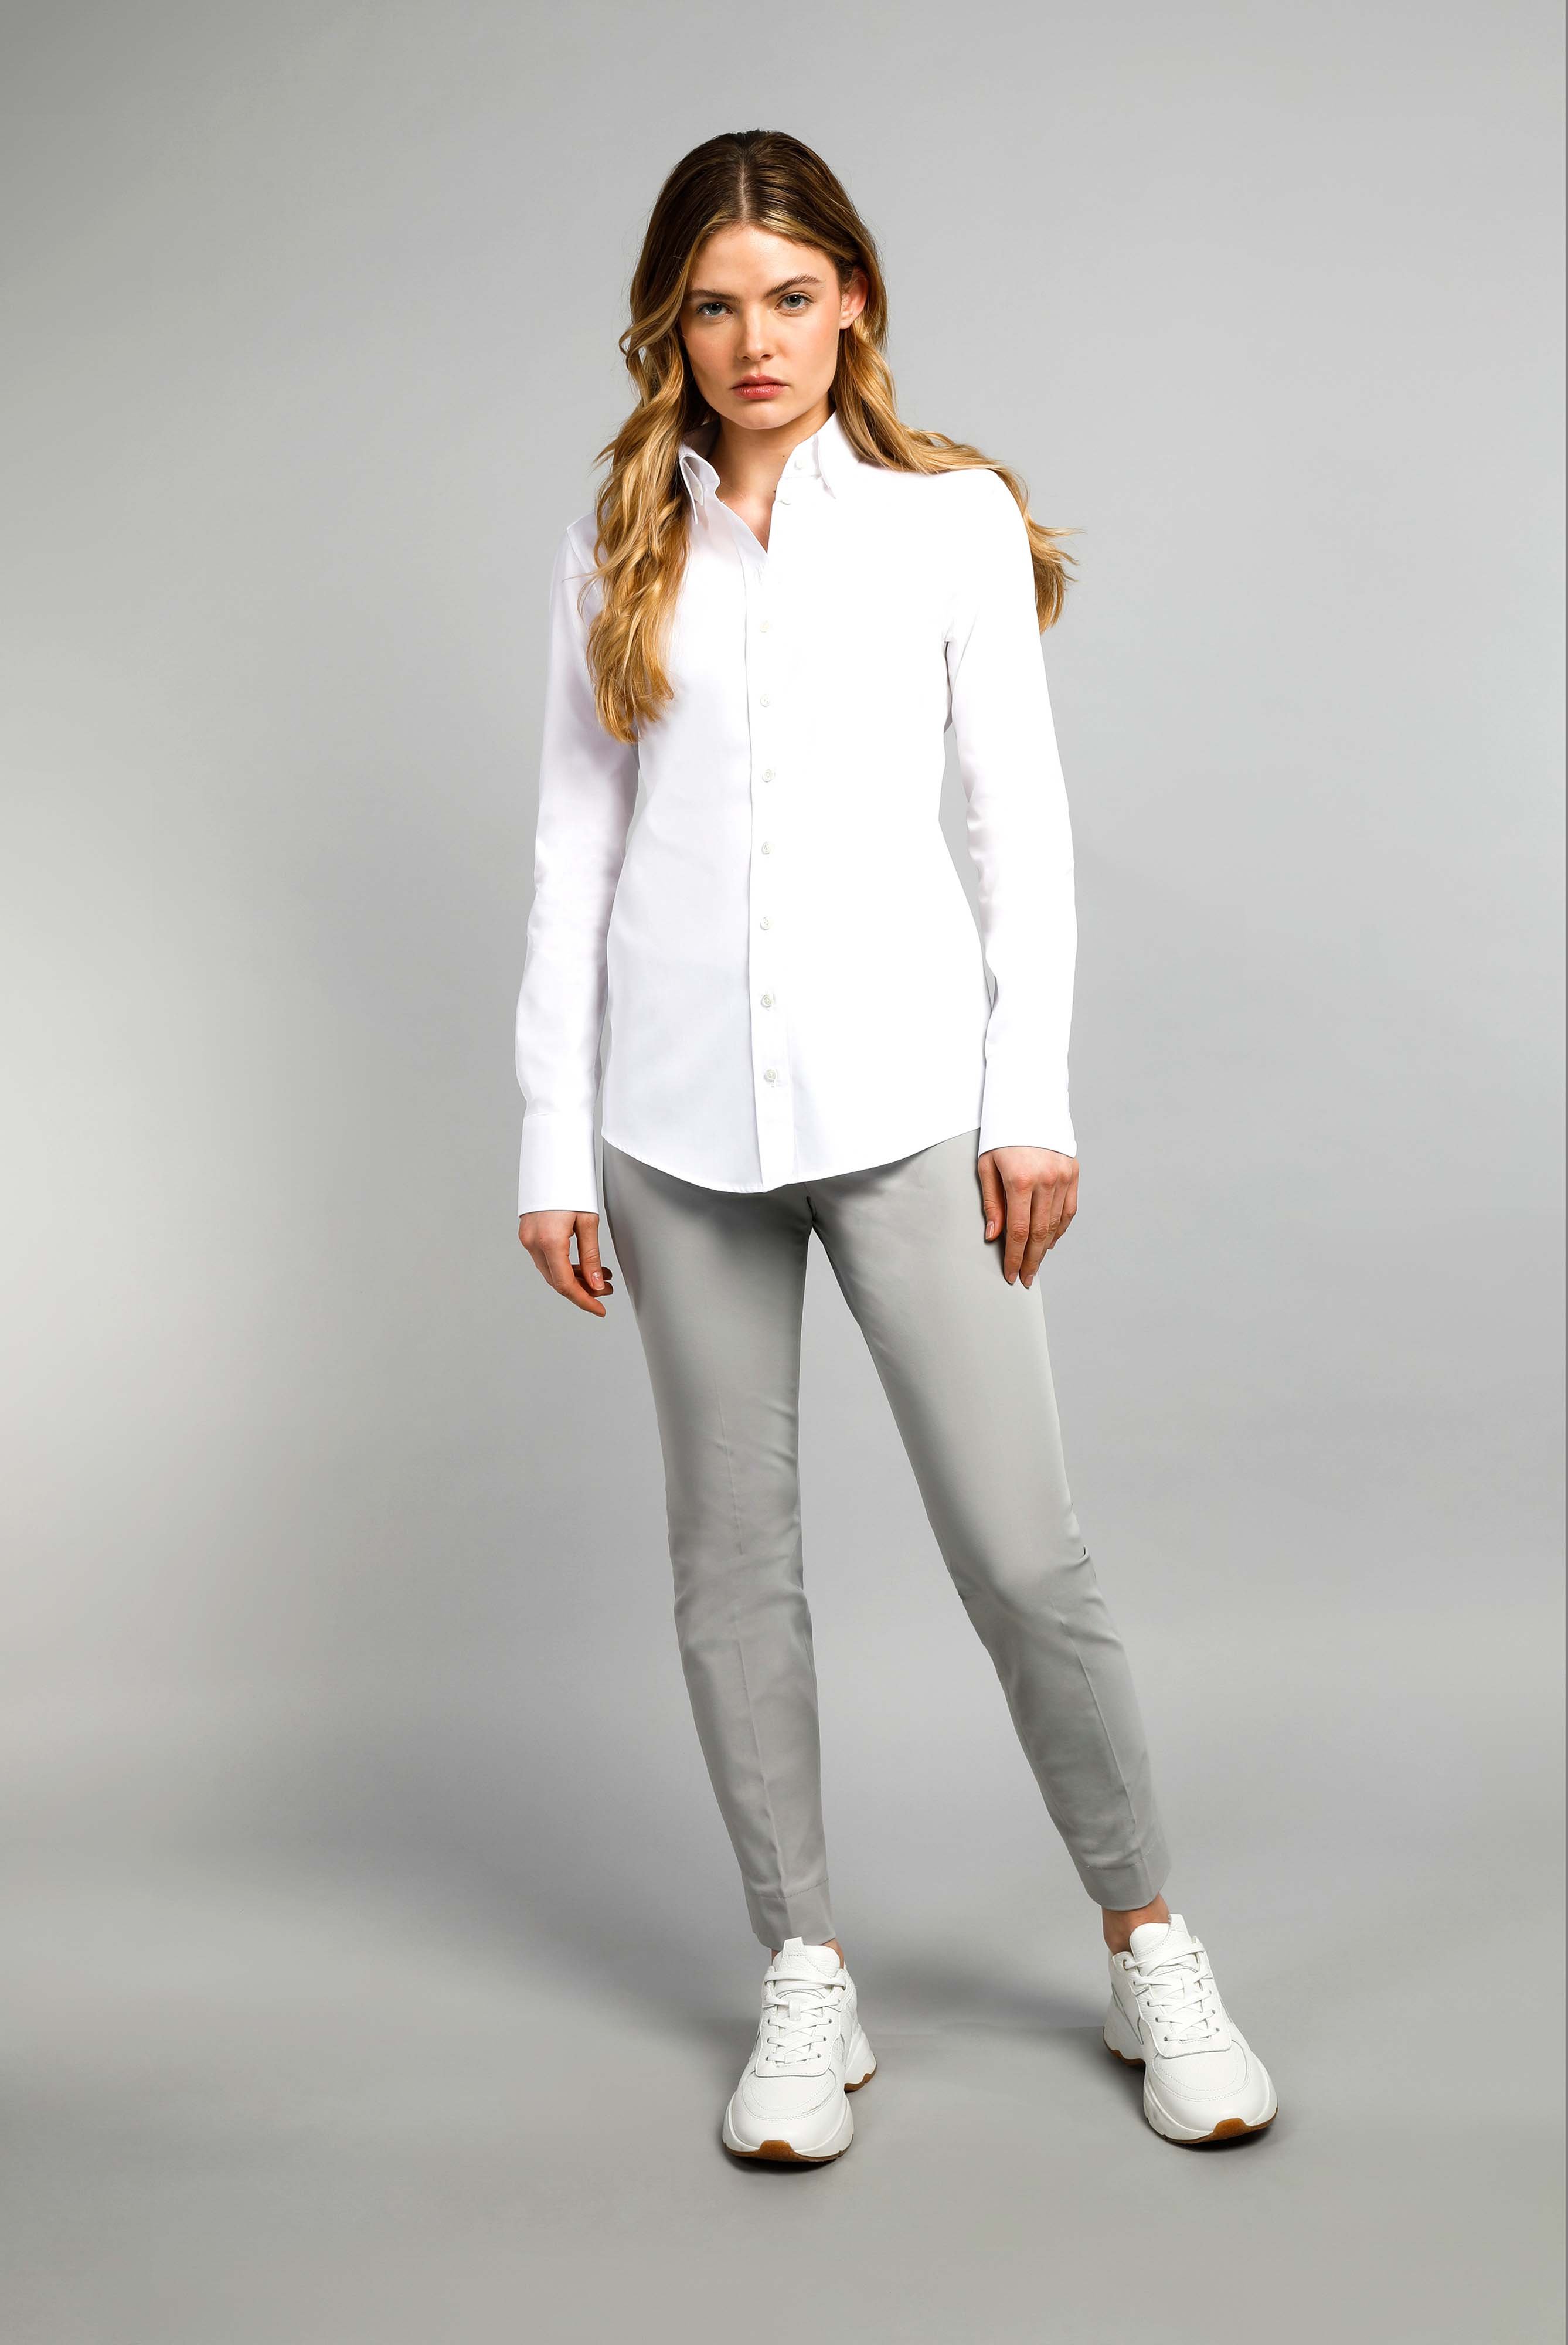 Business Blouses+Poplin Shirt Blouse with Button Down Collar+05.516T.73.130648.000.32